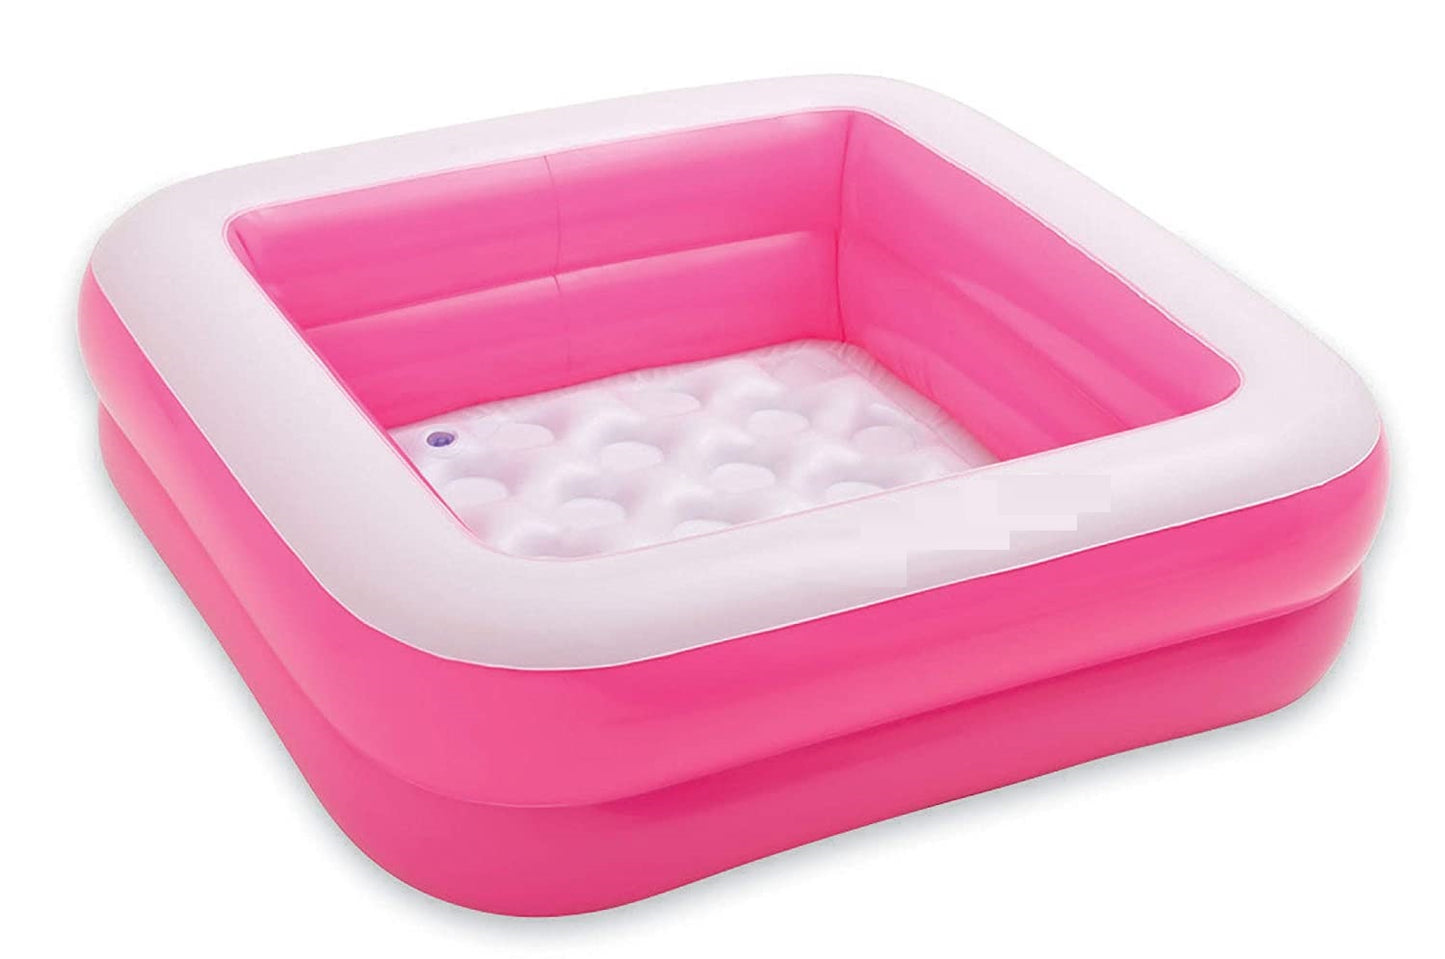 AZi® Inflatable Play Box Pool 57100NP Large Rectangular Baby Pool with Inflatable Floor | Multi Color